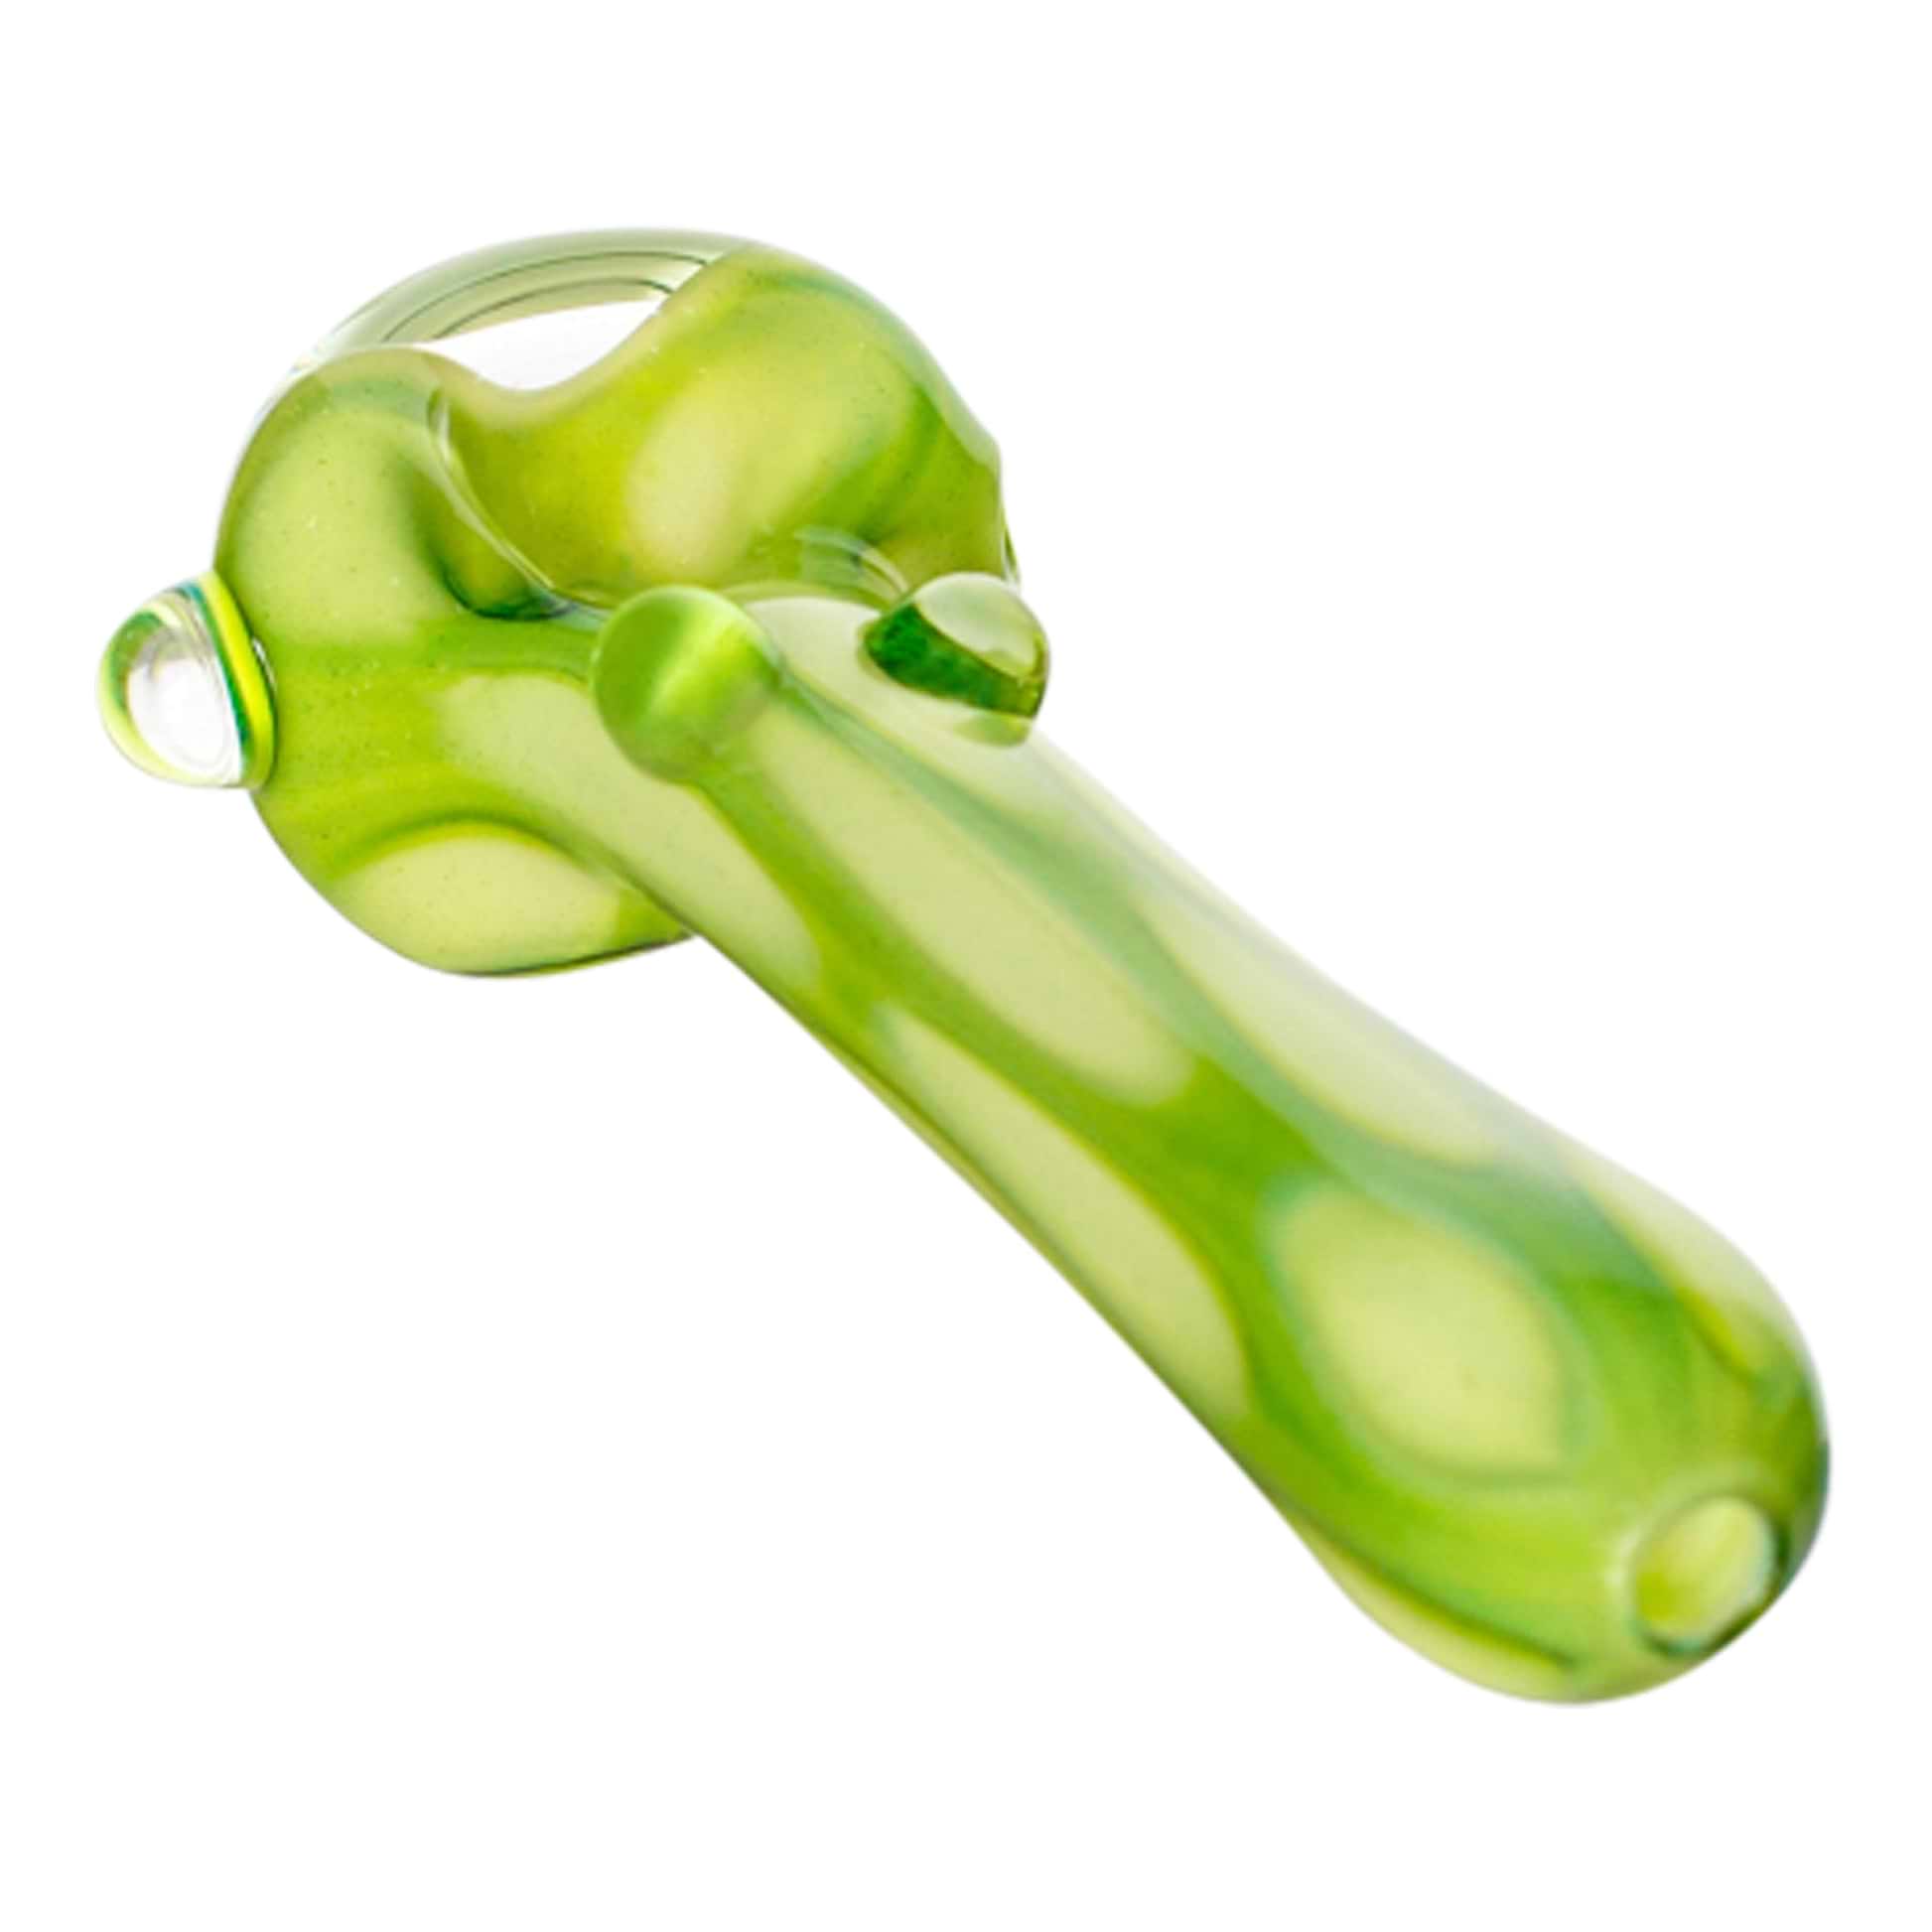 ELEV8 Honeycomb Pipe - 5in Green